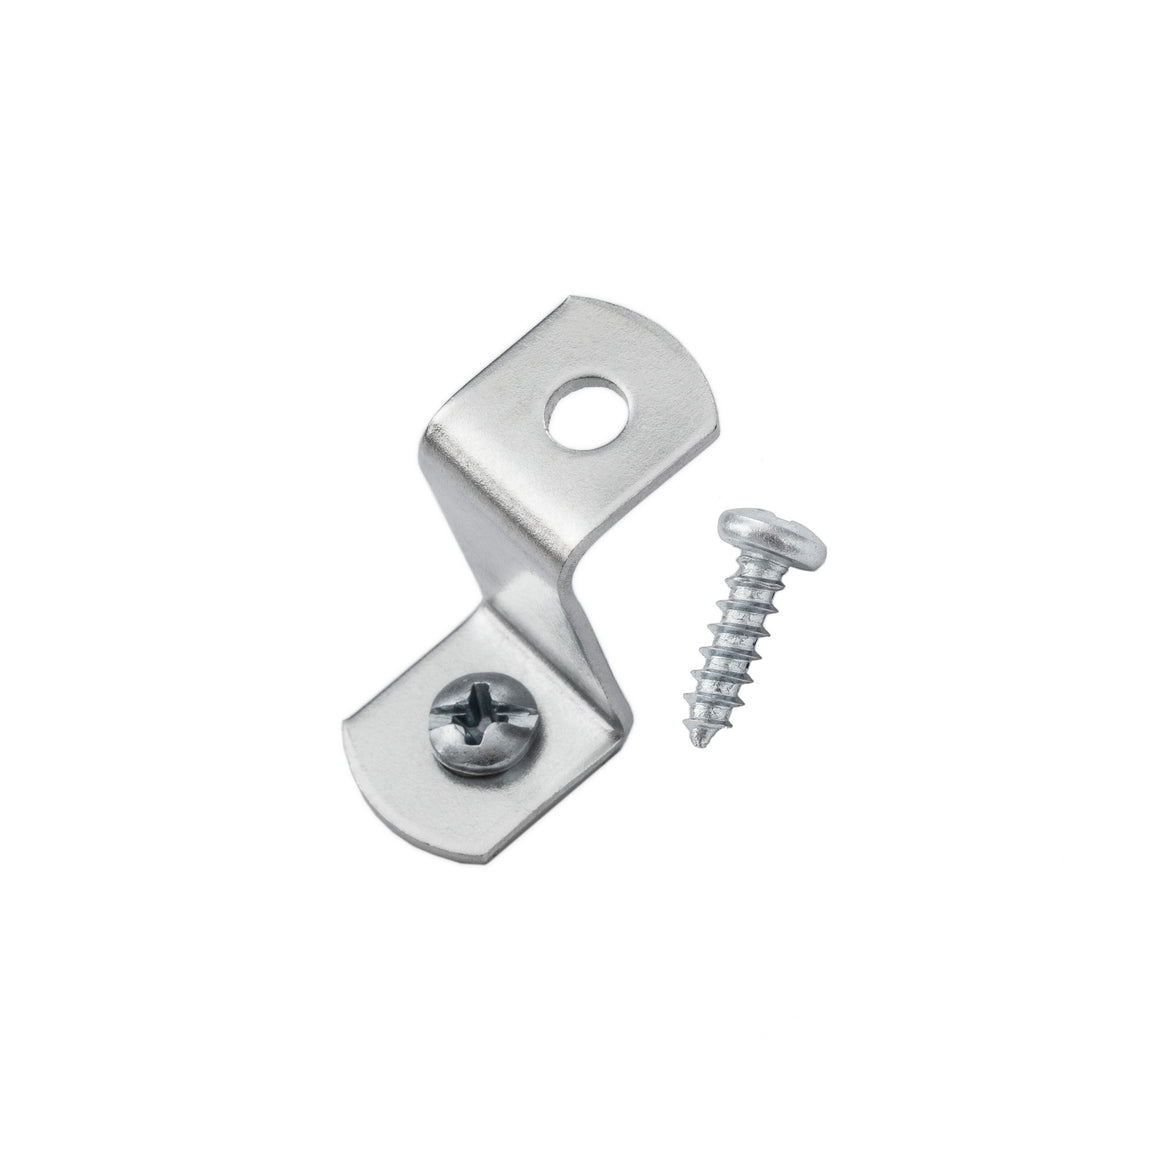 3/4" Offset Clips w/ Screws, Picture Frame Hardware